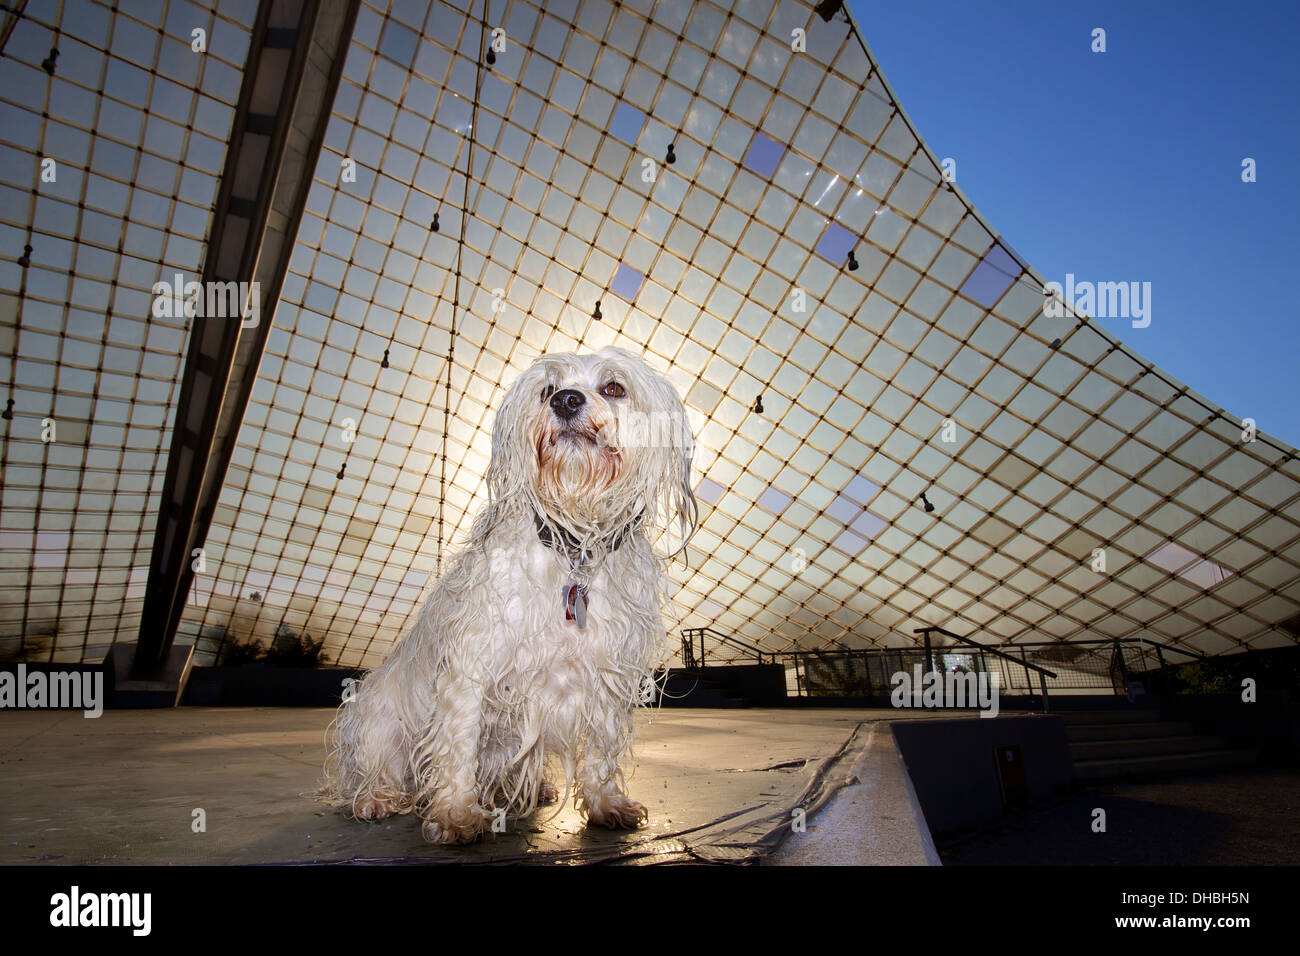 A small wet long hair dog sits on an outdoor stage in the scene. In the background, the stage roof and the back of the dog, the Stock Photo